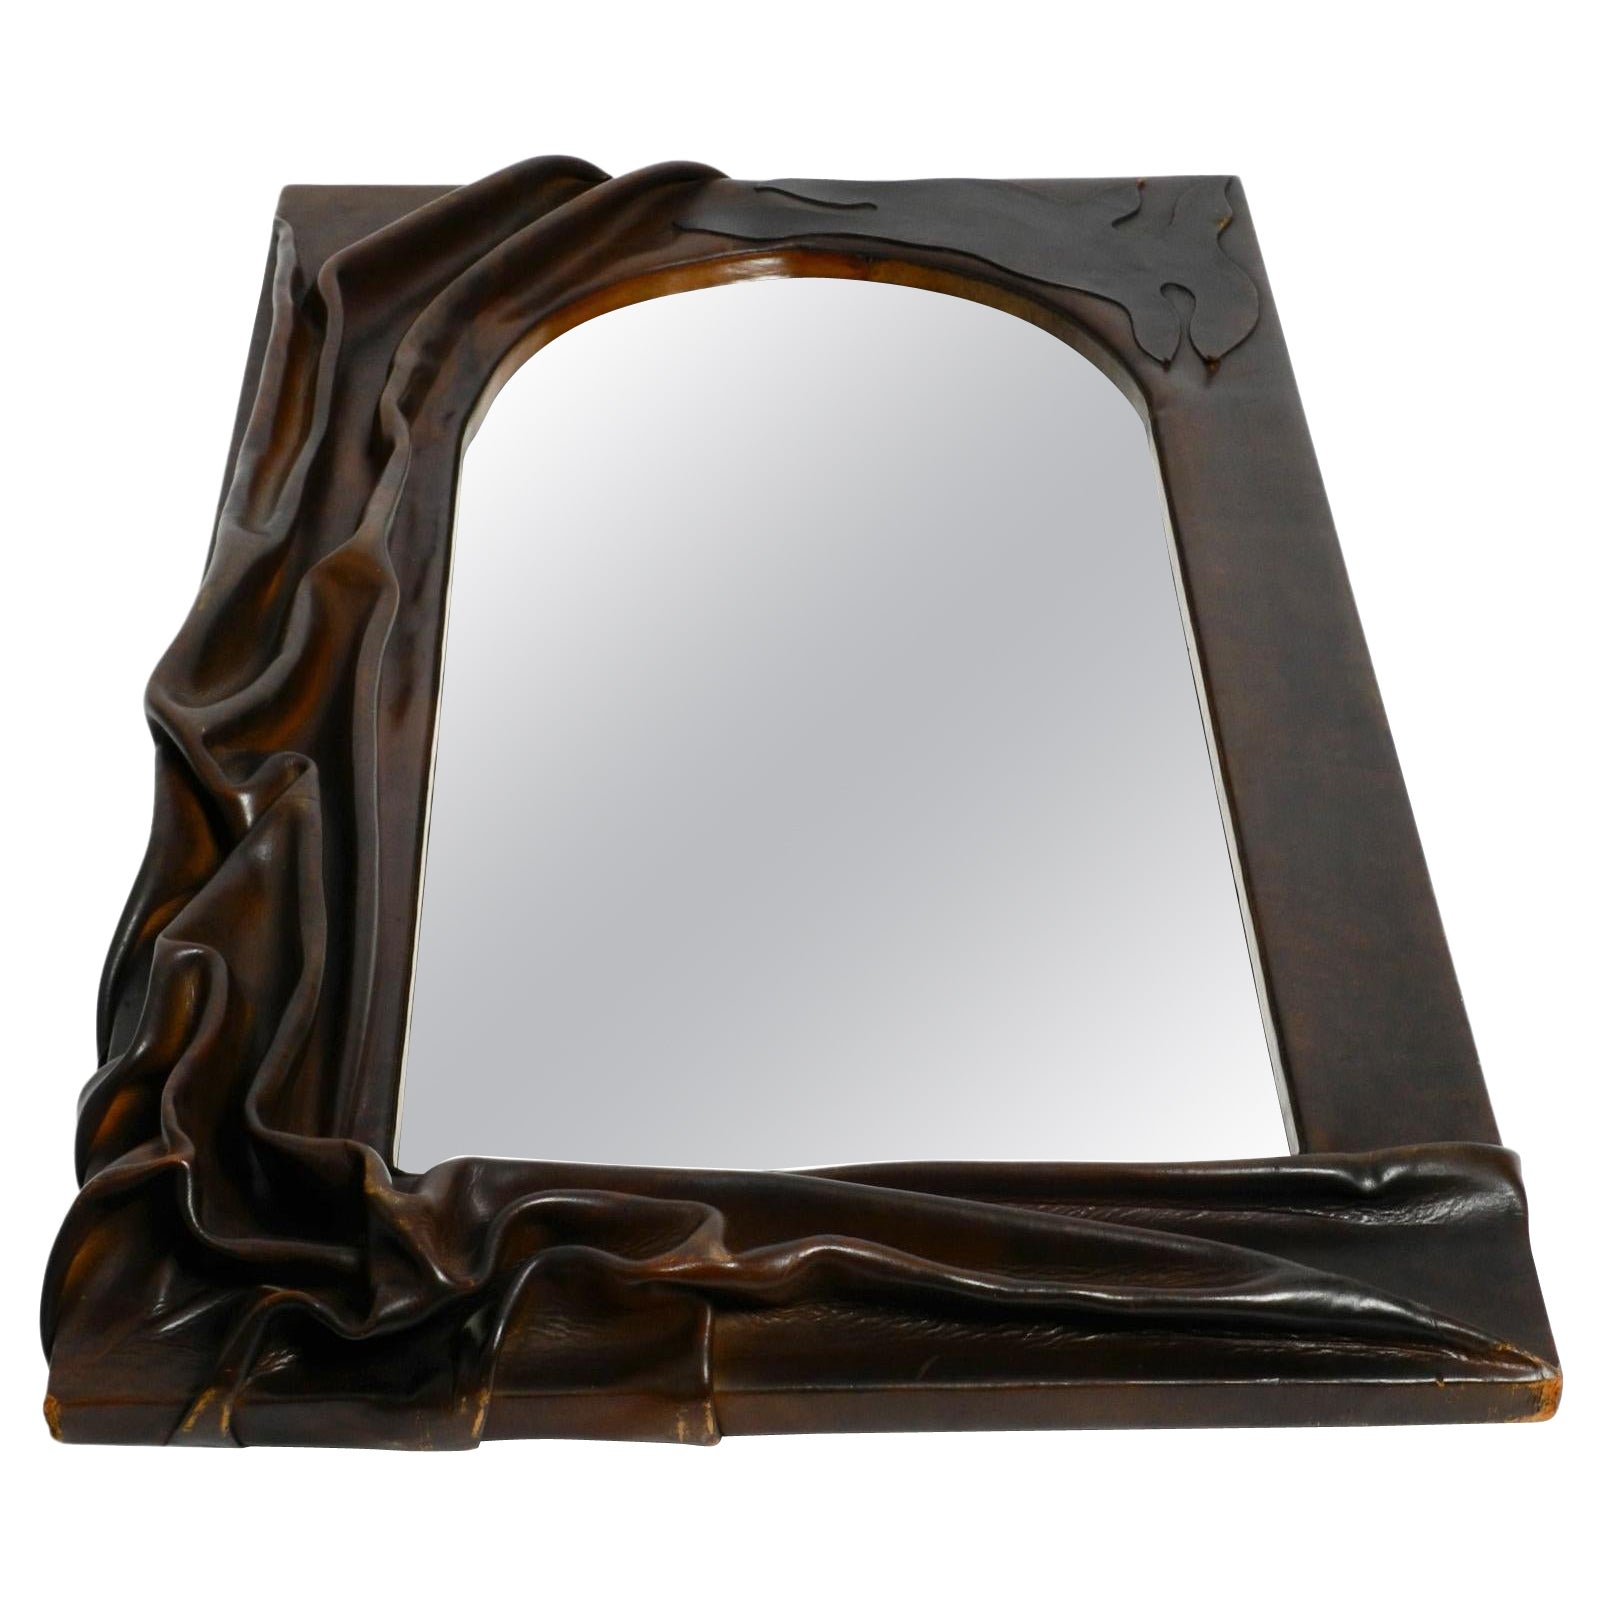 70s large wooden wall mirror with an elaborate and thick flowing leather cover 